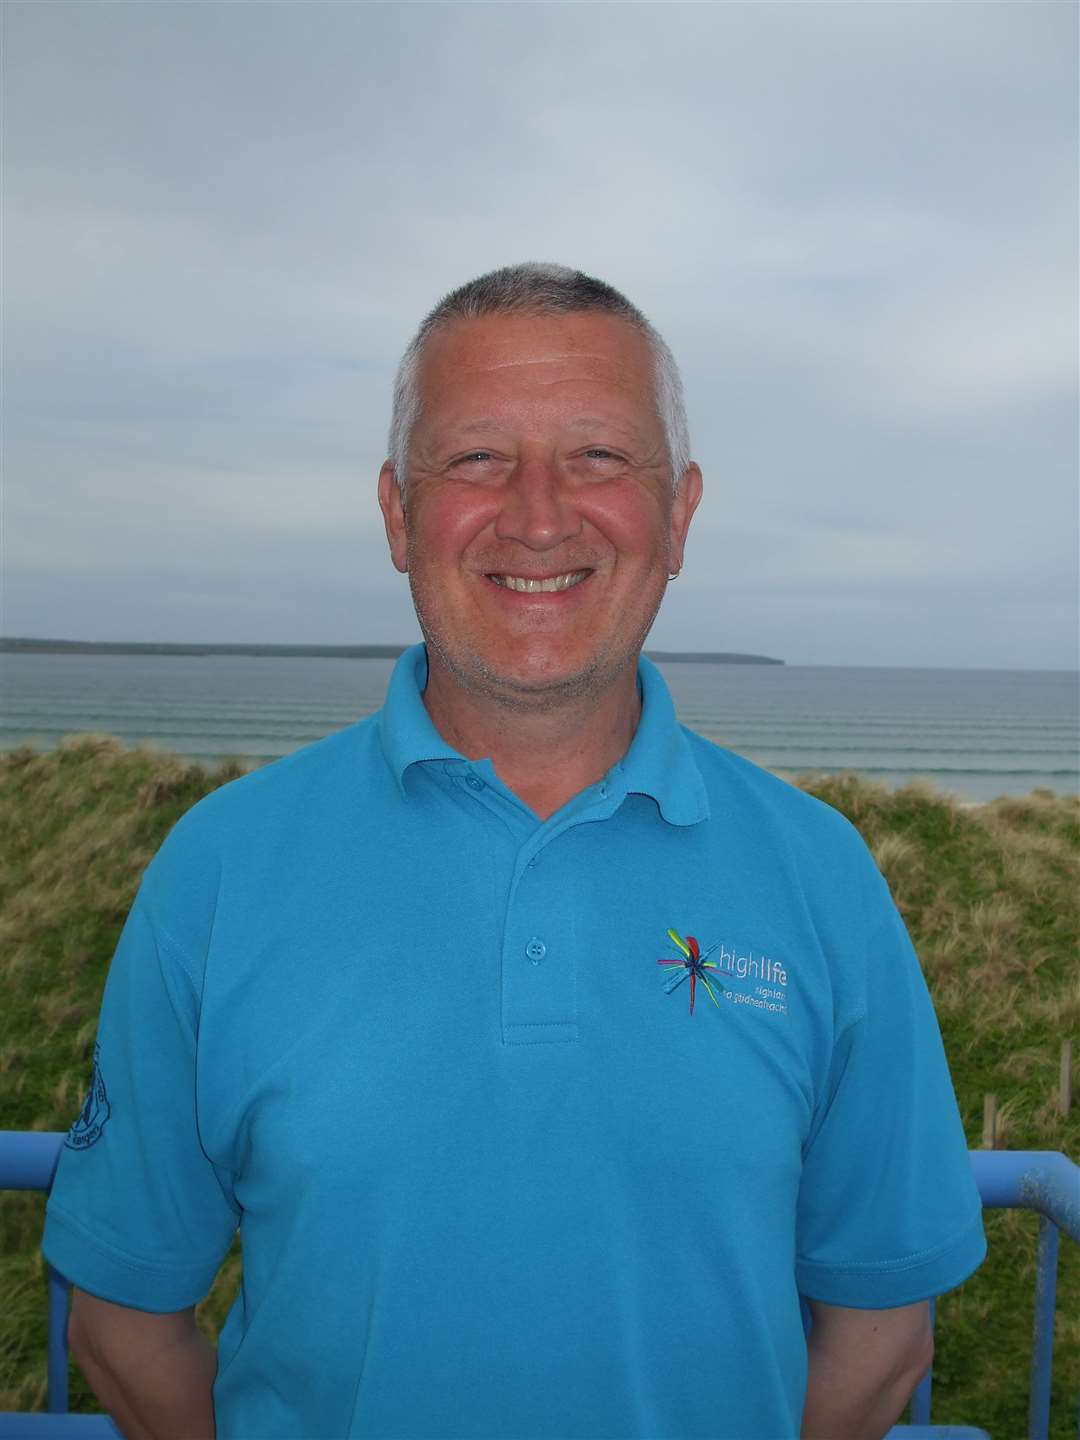 Paul Castle, HLH countryside ranger for Caithness and Sutherland, will present the talk.